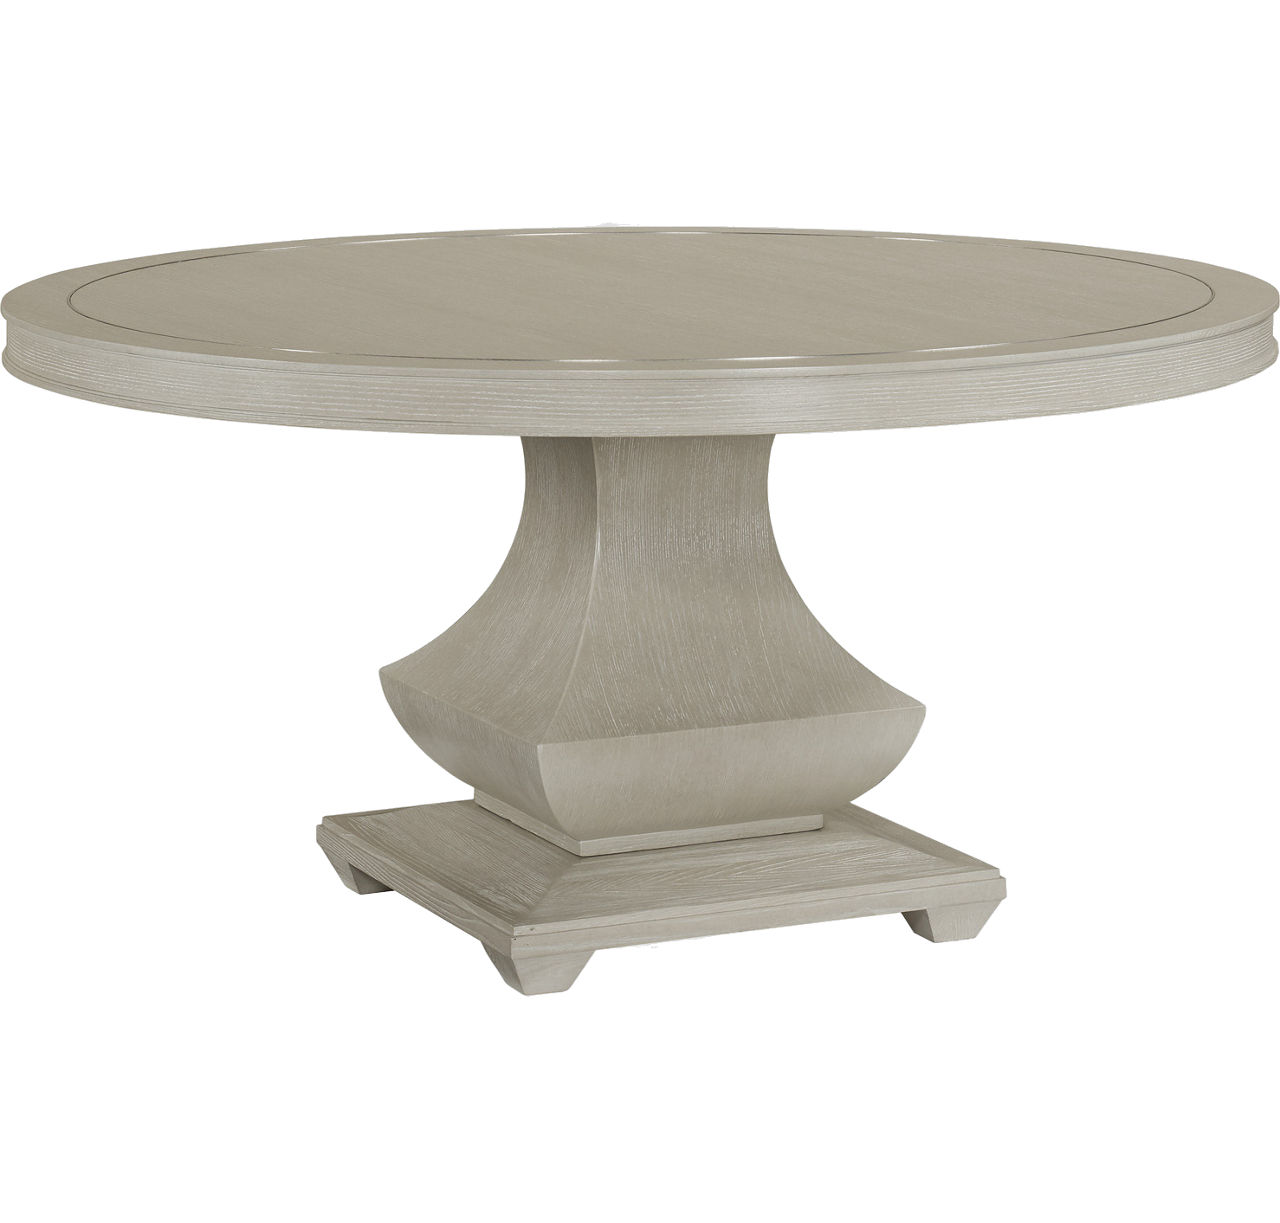 Hyde Park Round Dining Table